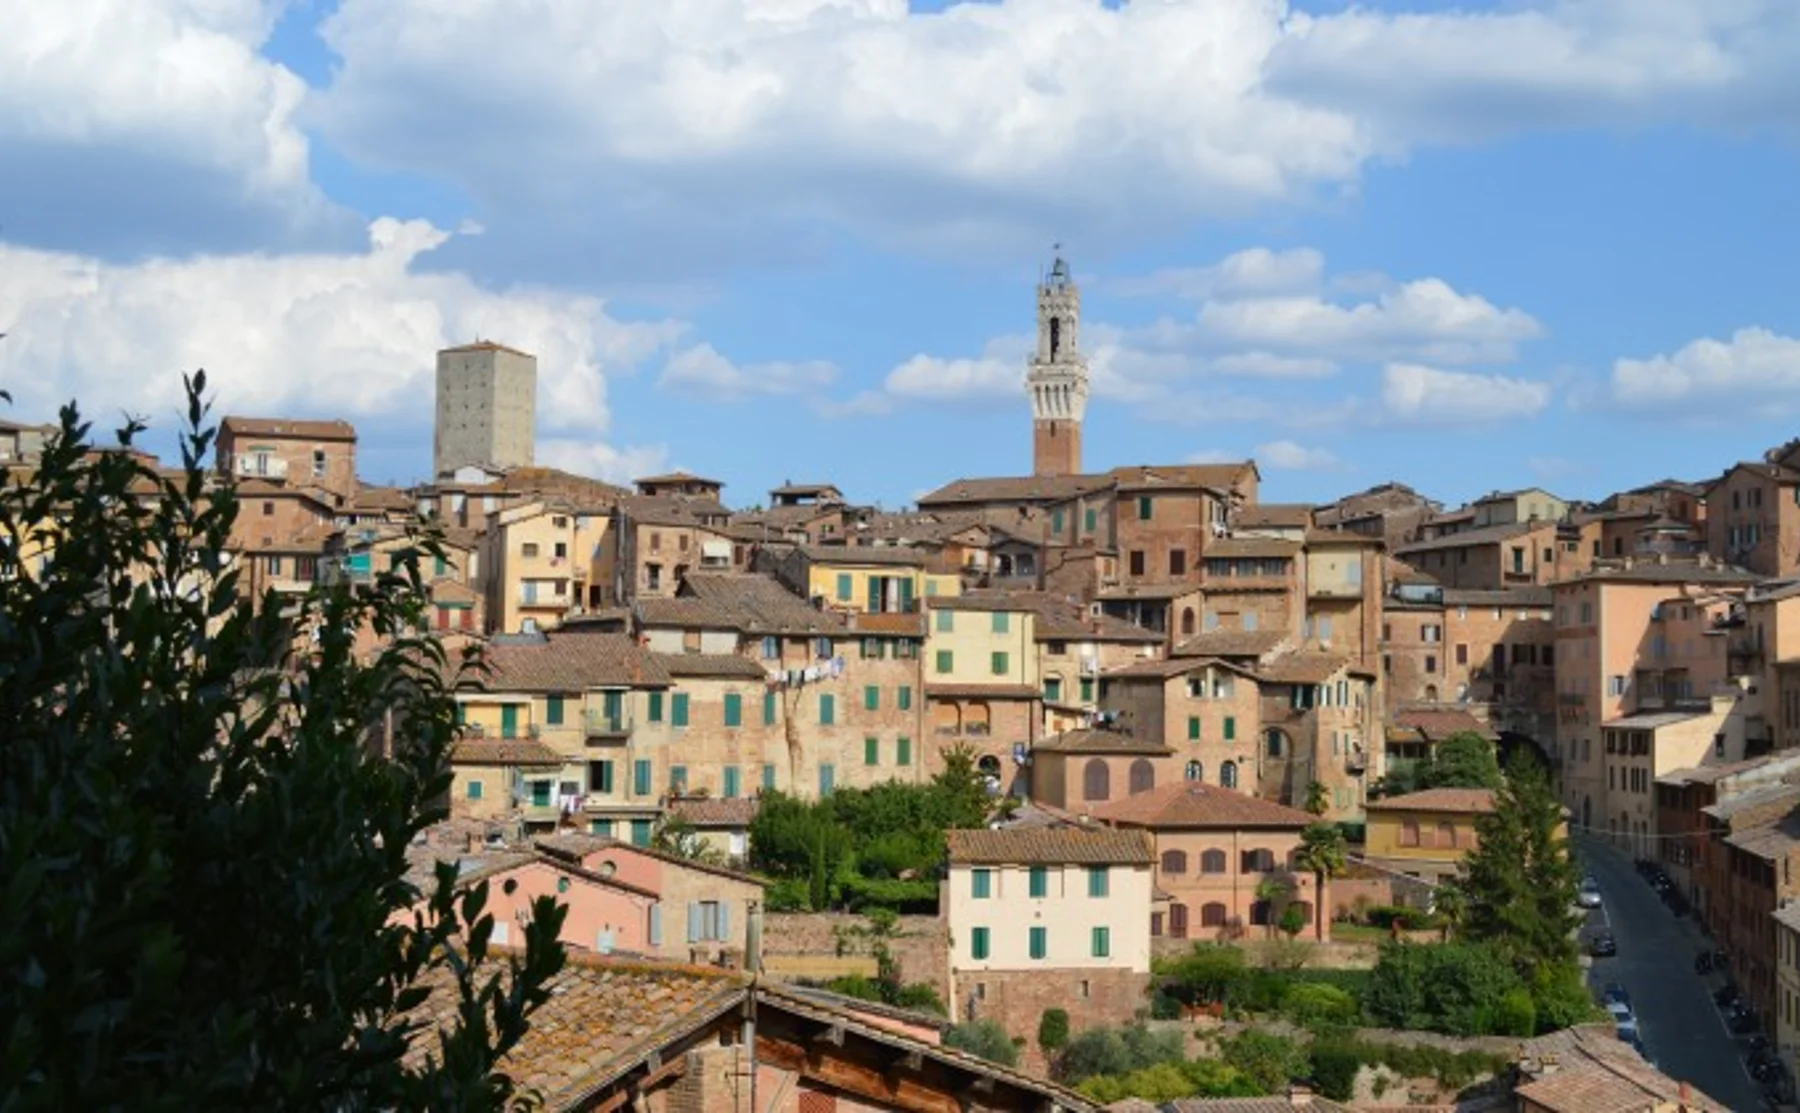 Private walking tour in Siena and Bakery - 262463